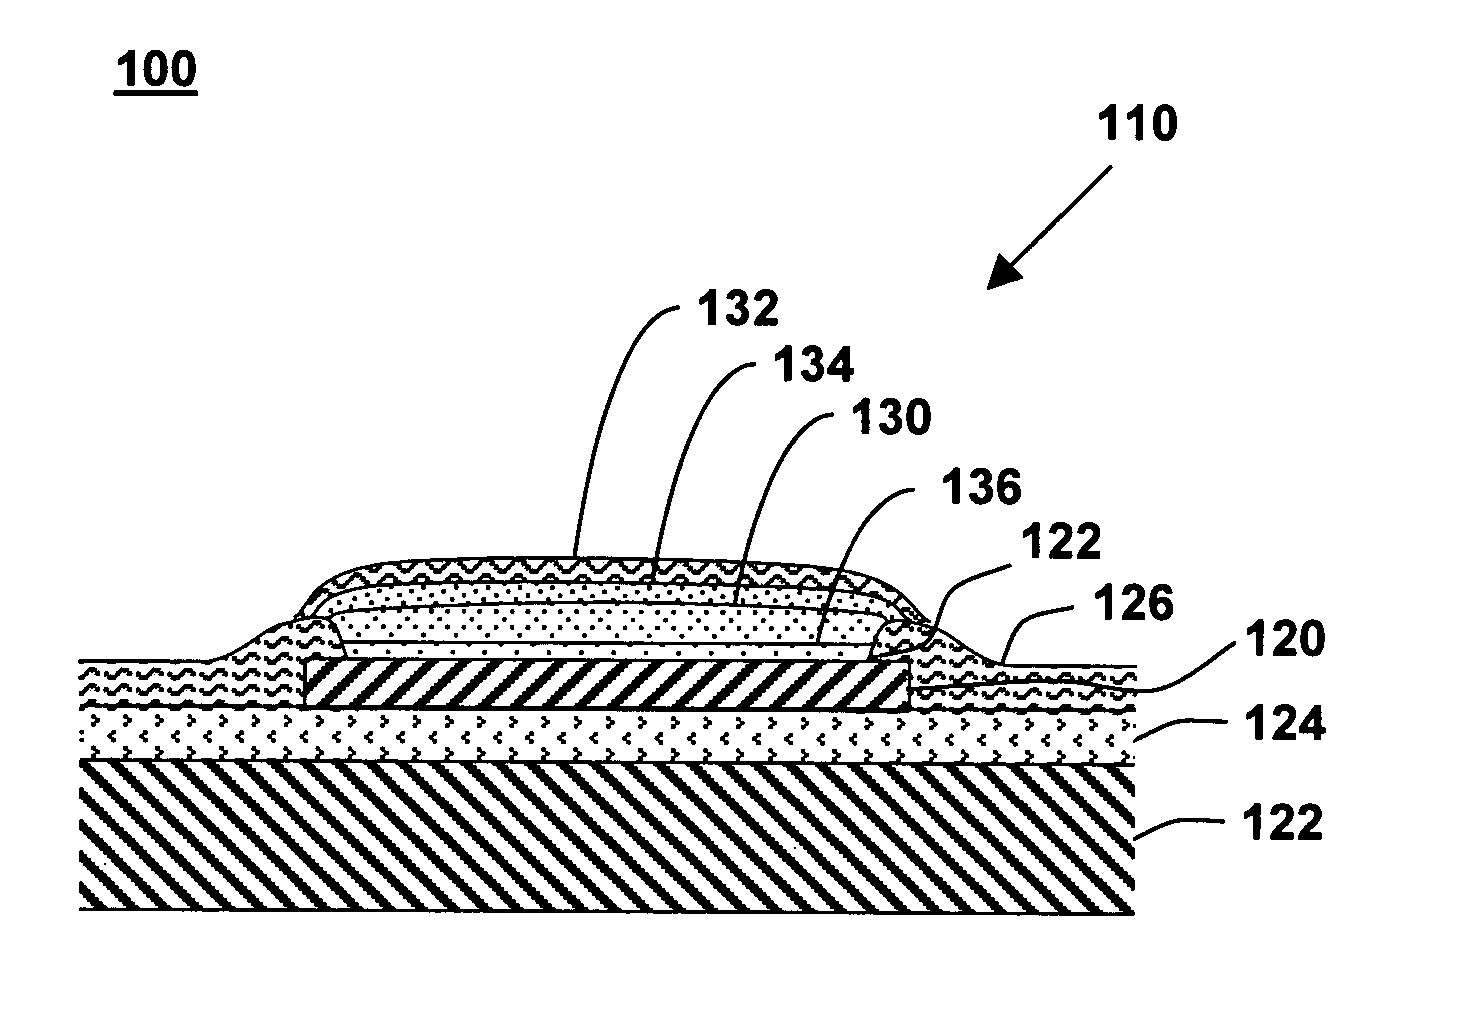 Activation plate for electroless and immersion plating of integrated circuits